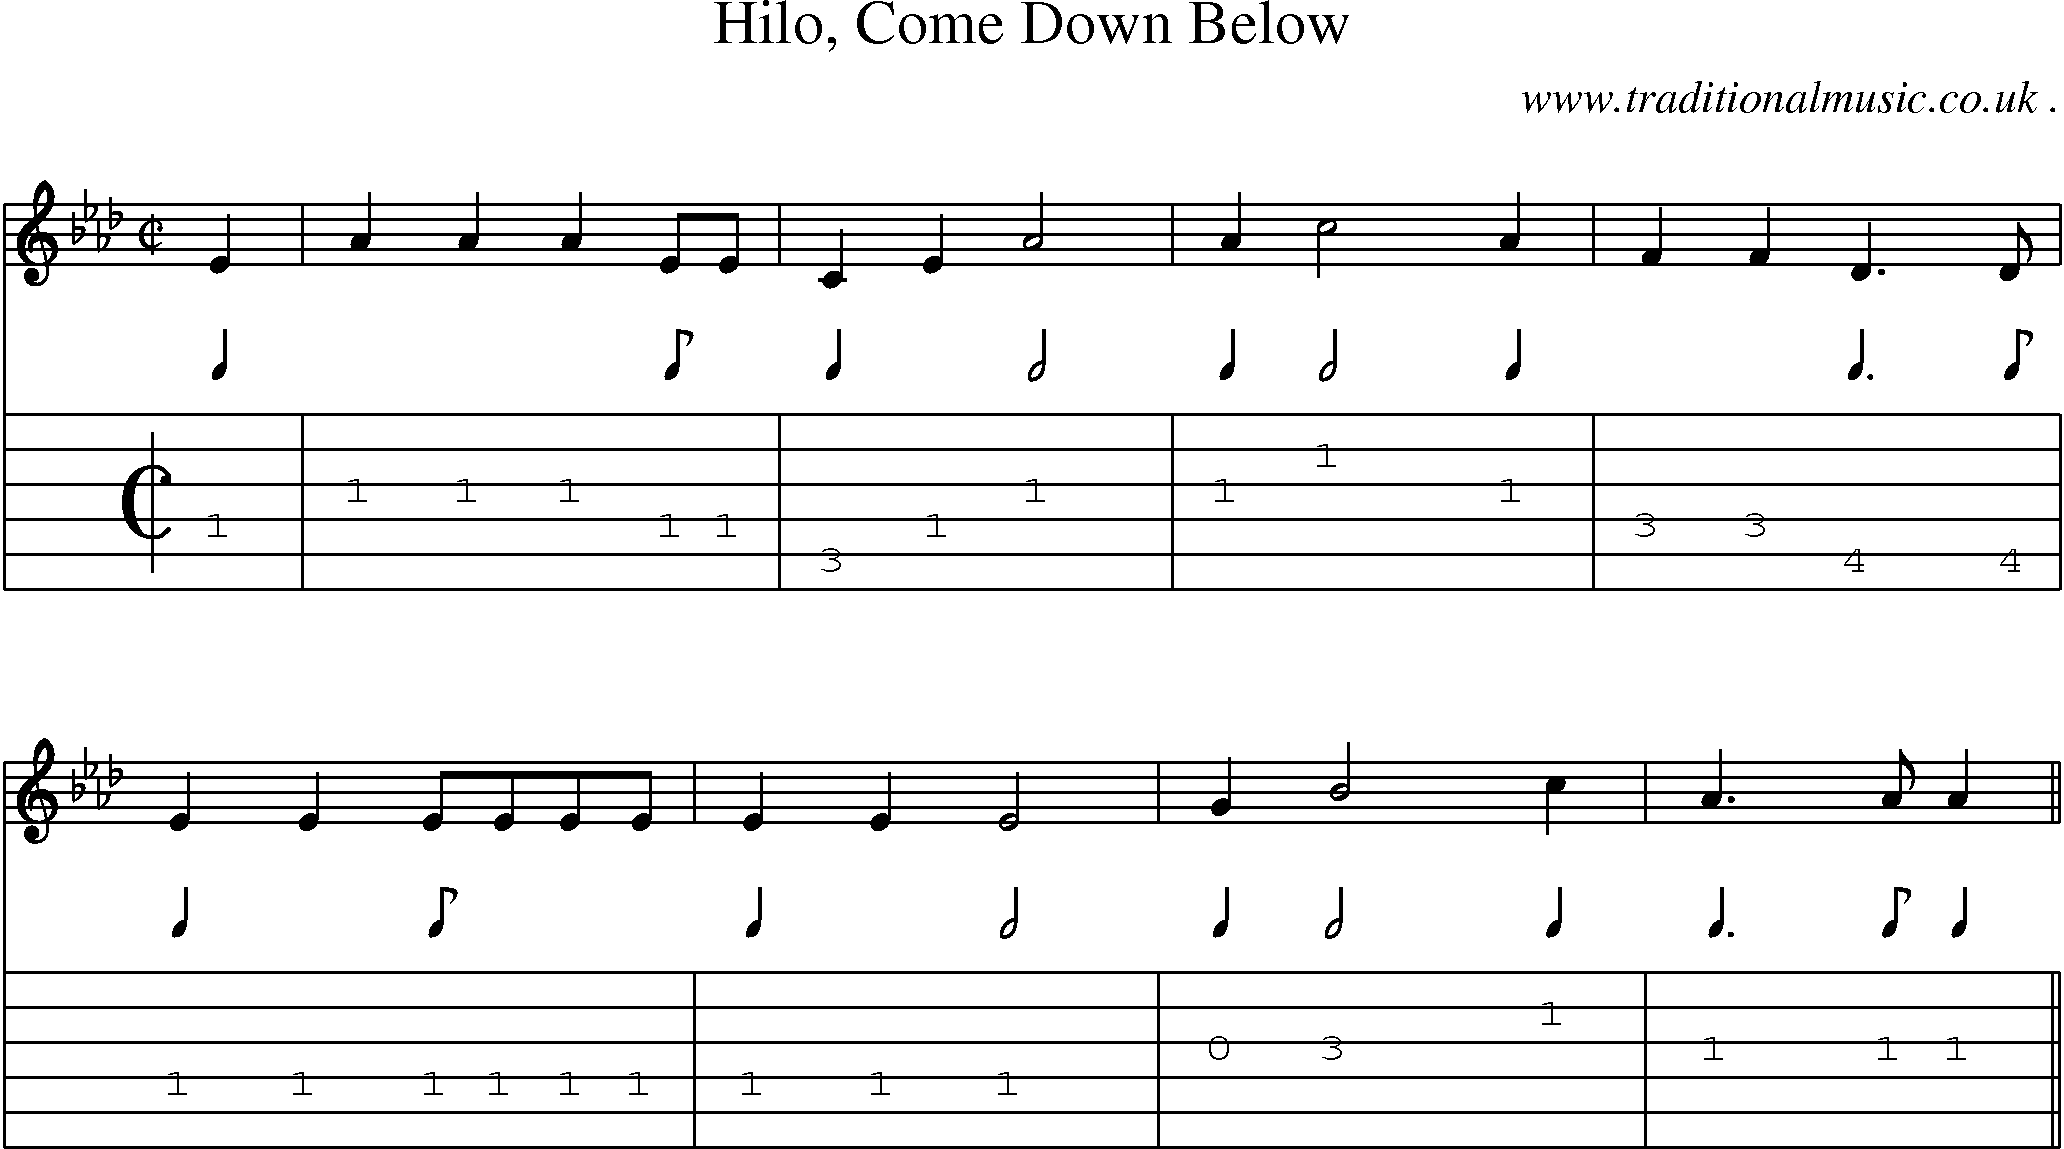 Sheet-Music and Guitar Tabs for Hilo Come Down Below